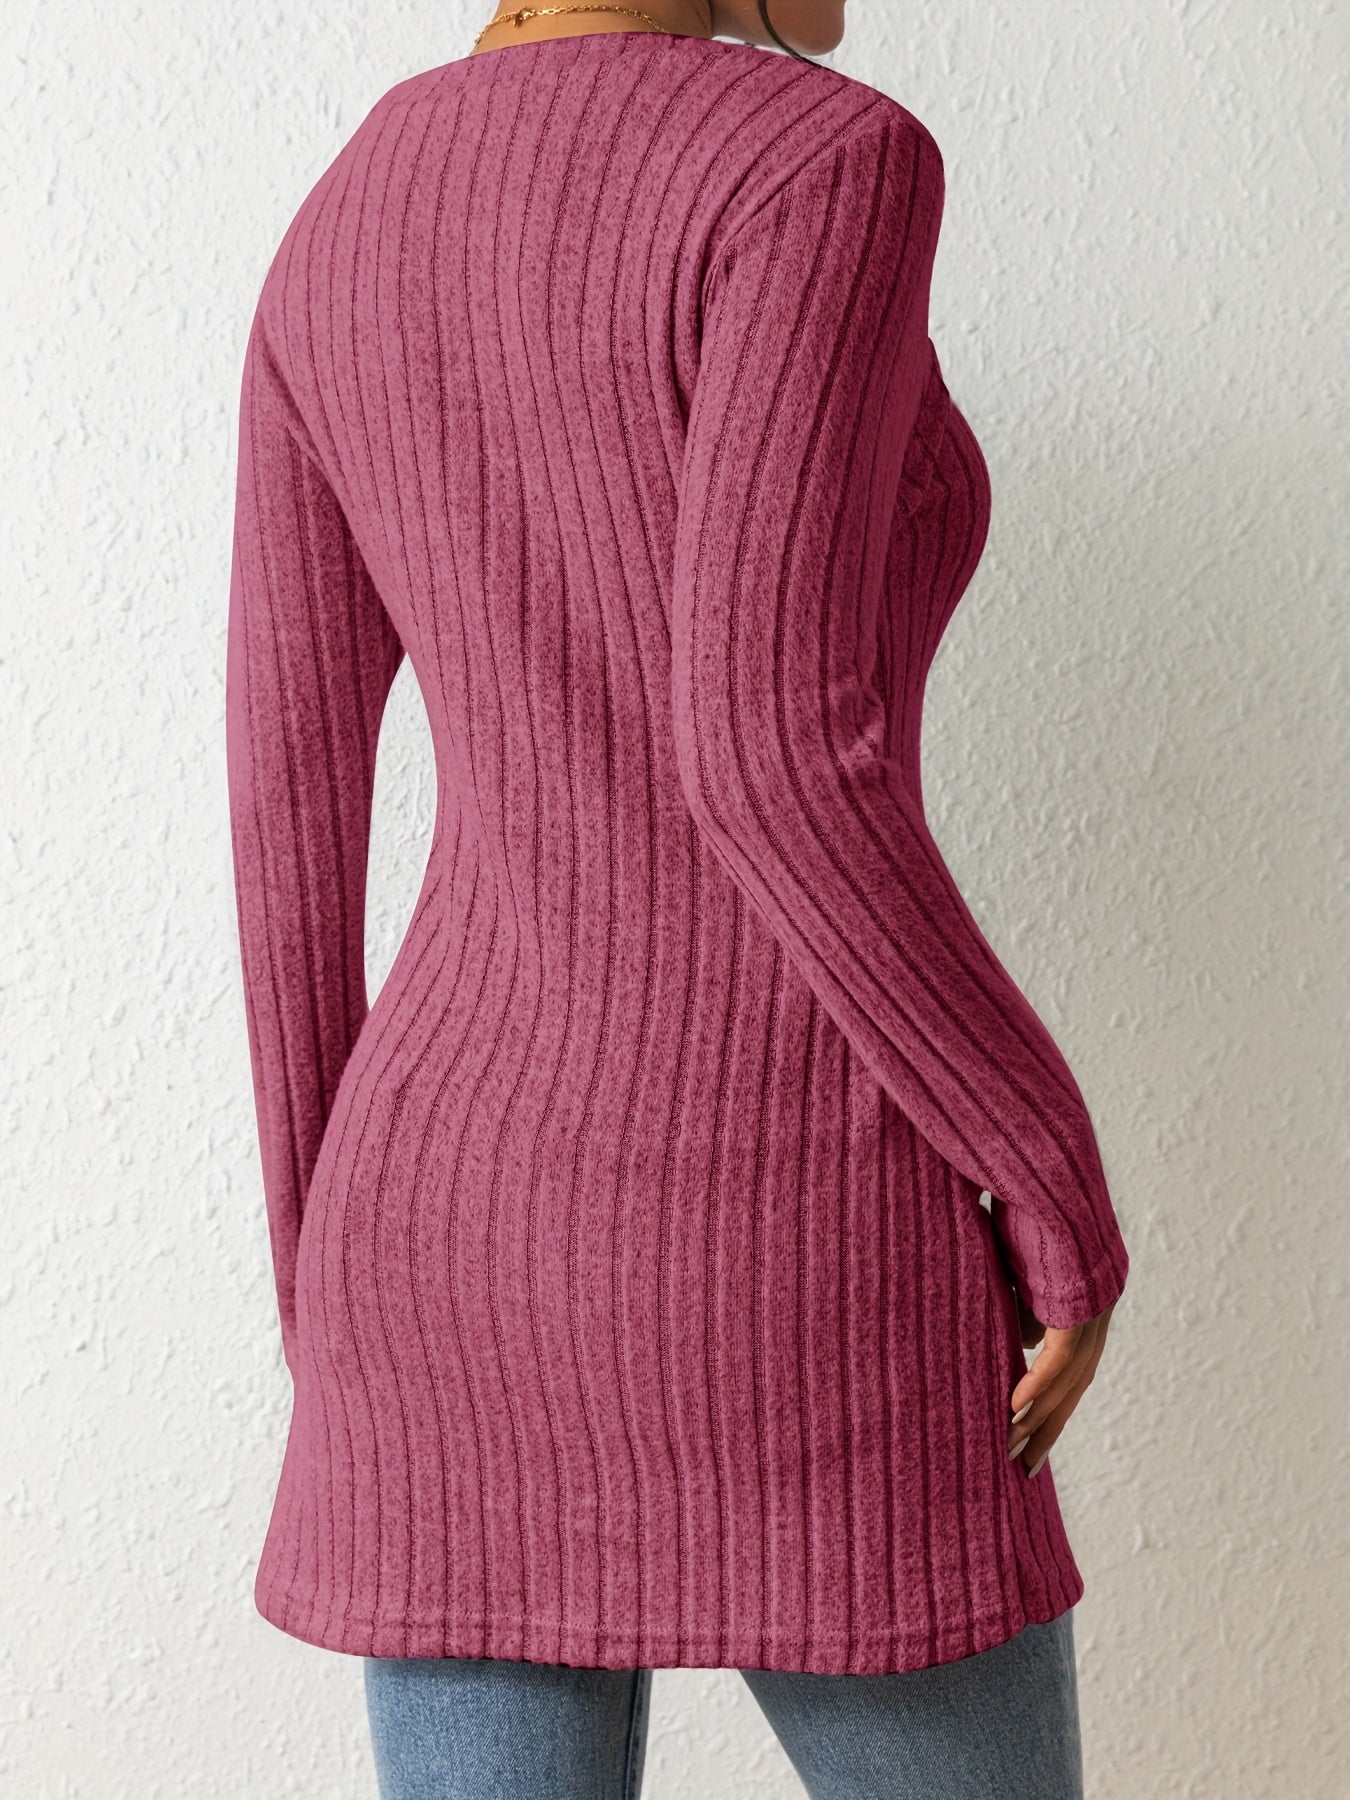 Ribbed Knit Square Neck Sweater, Casual Long Sleeve Split Sweater For Fall & Winter, Women's Clothing